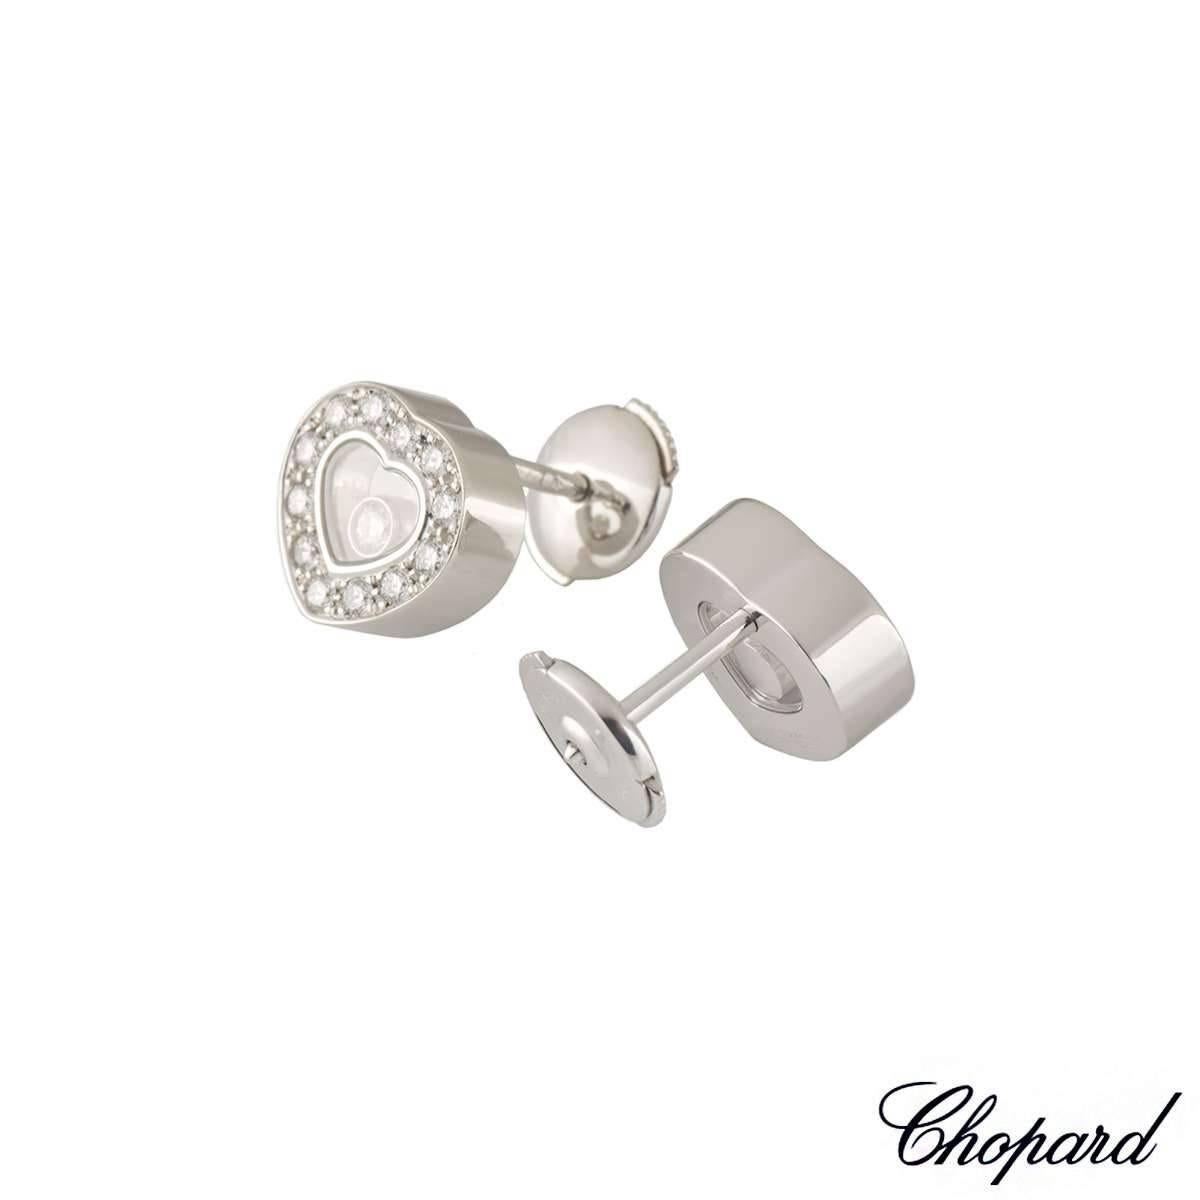 A pair of 18k white gold diamond earrings from the Chopard Happy Diamonds collection. The heart shape earrings have 24 pave set round brilliant cut diamond around the outer edges totalling 0.41ct. Complete with 2 single signature floating round